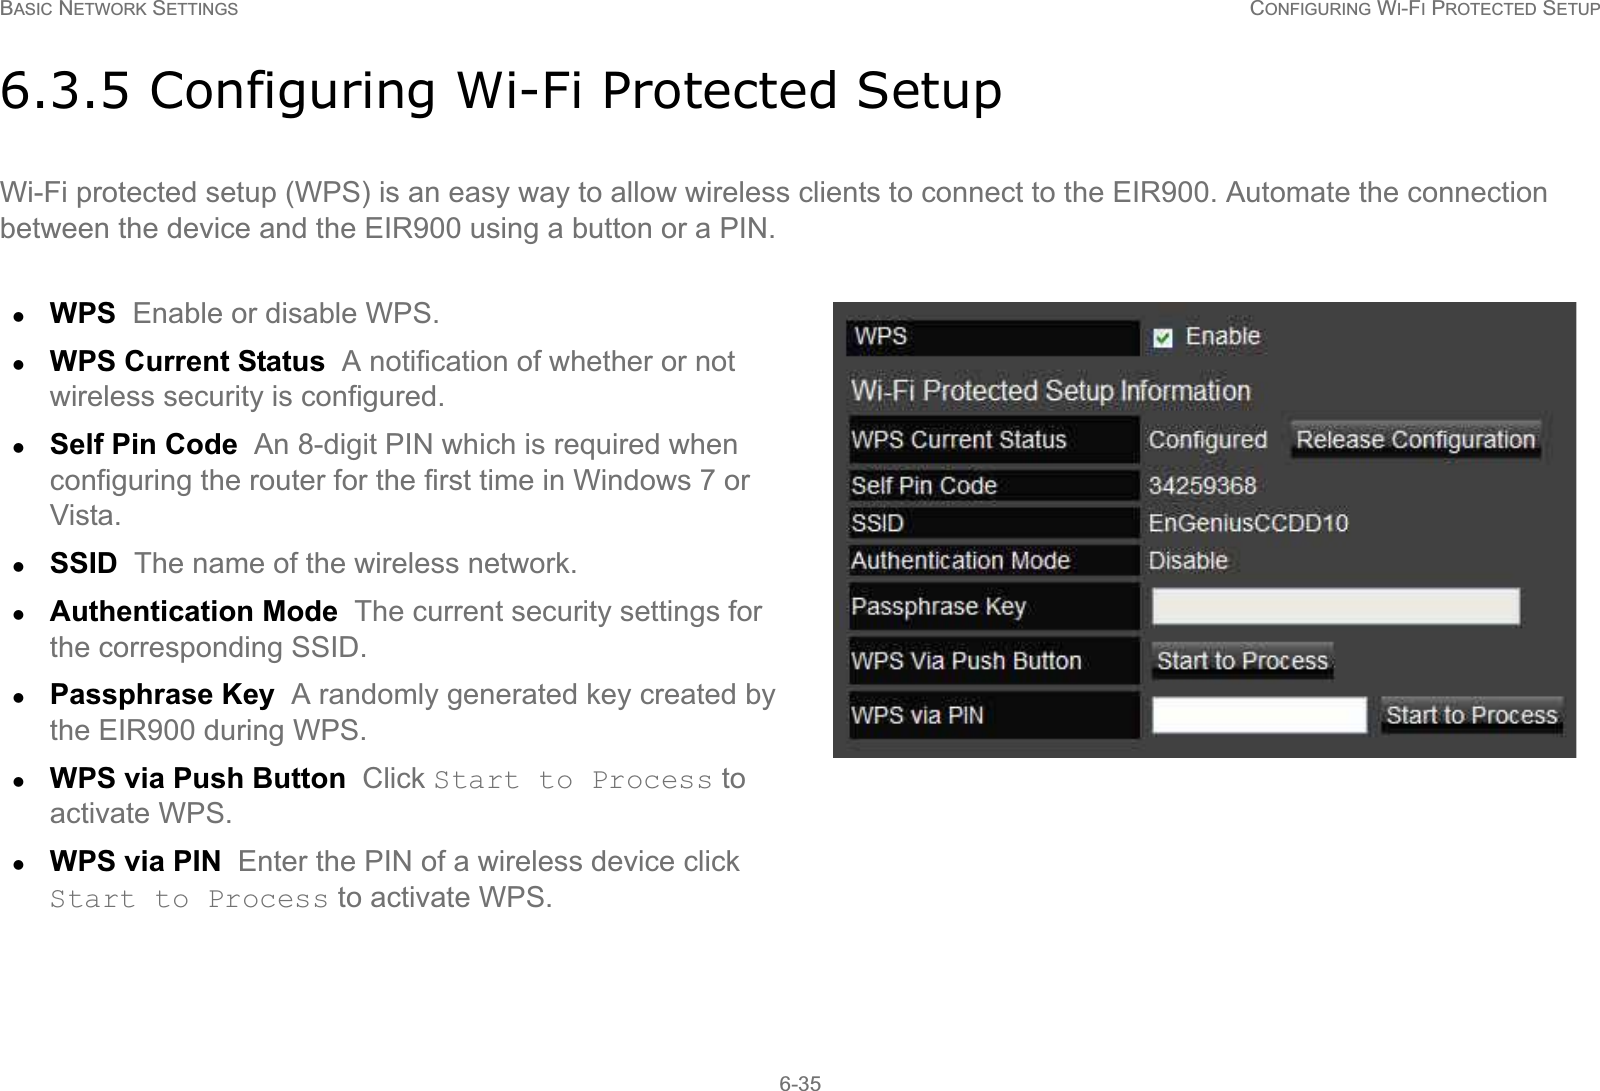 BASIC NETWORK SETTINGS CONFIGURING WI-FI PROTECTED SETUP6-356.3.5 Configuring Wi-Fi Protected SetupWi-Fi protected setup (WPS) is an easy way to allow wireless clients to connect to the EIR900. Automate the connection between the device and the EIR900 using a button or a PIN.zWPS  Enable or disable WPS.zWPS Current Status  A notification of whether or not wireless security is configured.zSelf Pin Code  An 8-digit PIN which is required when configuring the router for the first time in Windows 7 or Vista.zSSID  The name of the wireless network.zAuthentication Mode  The current security settings for the corresponding SSID.zPassphrase Key  A randomly generated key created by the EIR900 during WPS.zWPS via Push Button  Click Start to Process to activate WPS.zWPS via PIN  Enter the PIN of a wireless device click Start to Process to activate WPS.